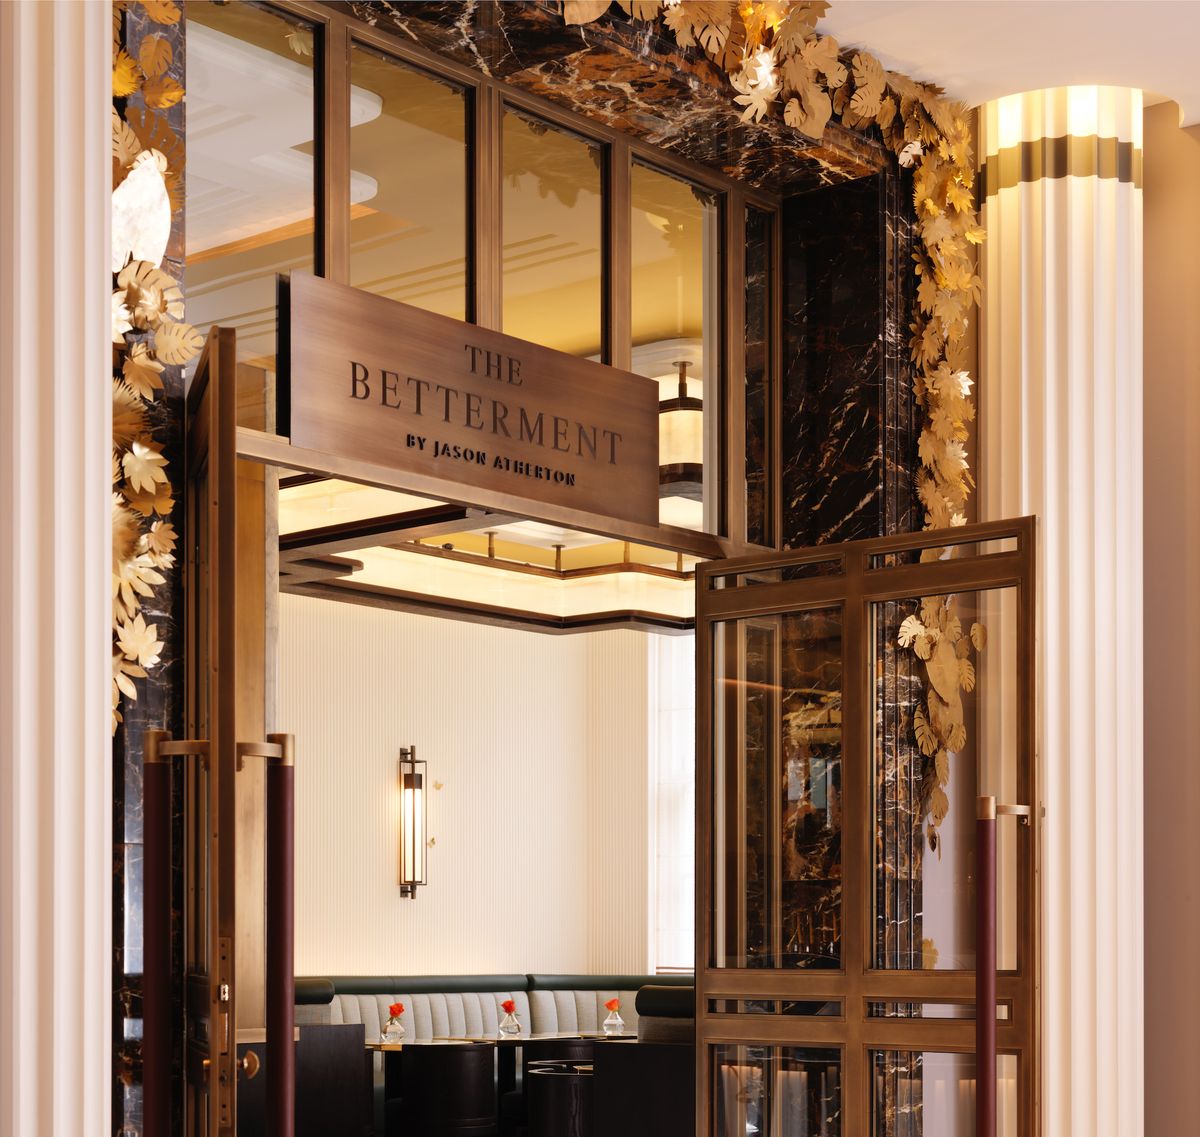 <p><strong>The restaurants: </strong></p><p>The newly opened<a href="https://lxrhotels.hiltonbusinessonline.com/lxr/biltmore-mayfair/dine/"> Cafe Biltmore restaurant</a>, the second to be overseen by chef Jason Atherton, is the relaxed sister restaurant to the hotel's Betterment restaurant. </p><p>With a large terrace perfect for summery Al-Fresco dinners (paired expertly with wine chosen by the sommelier), you'll forget you're in central London thanks to the leafy, garden decor. Dishes include an elegant take on casual classics like pasta and wood-fired pizza, burgers and seafood dishes like grilled Dover Sole and steamed south coast mussels.</p><p>Top tip: Start off with one of the Biltmore's signature twist cocktails like The Biltmore Spritz.</p>